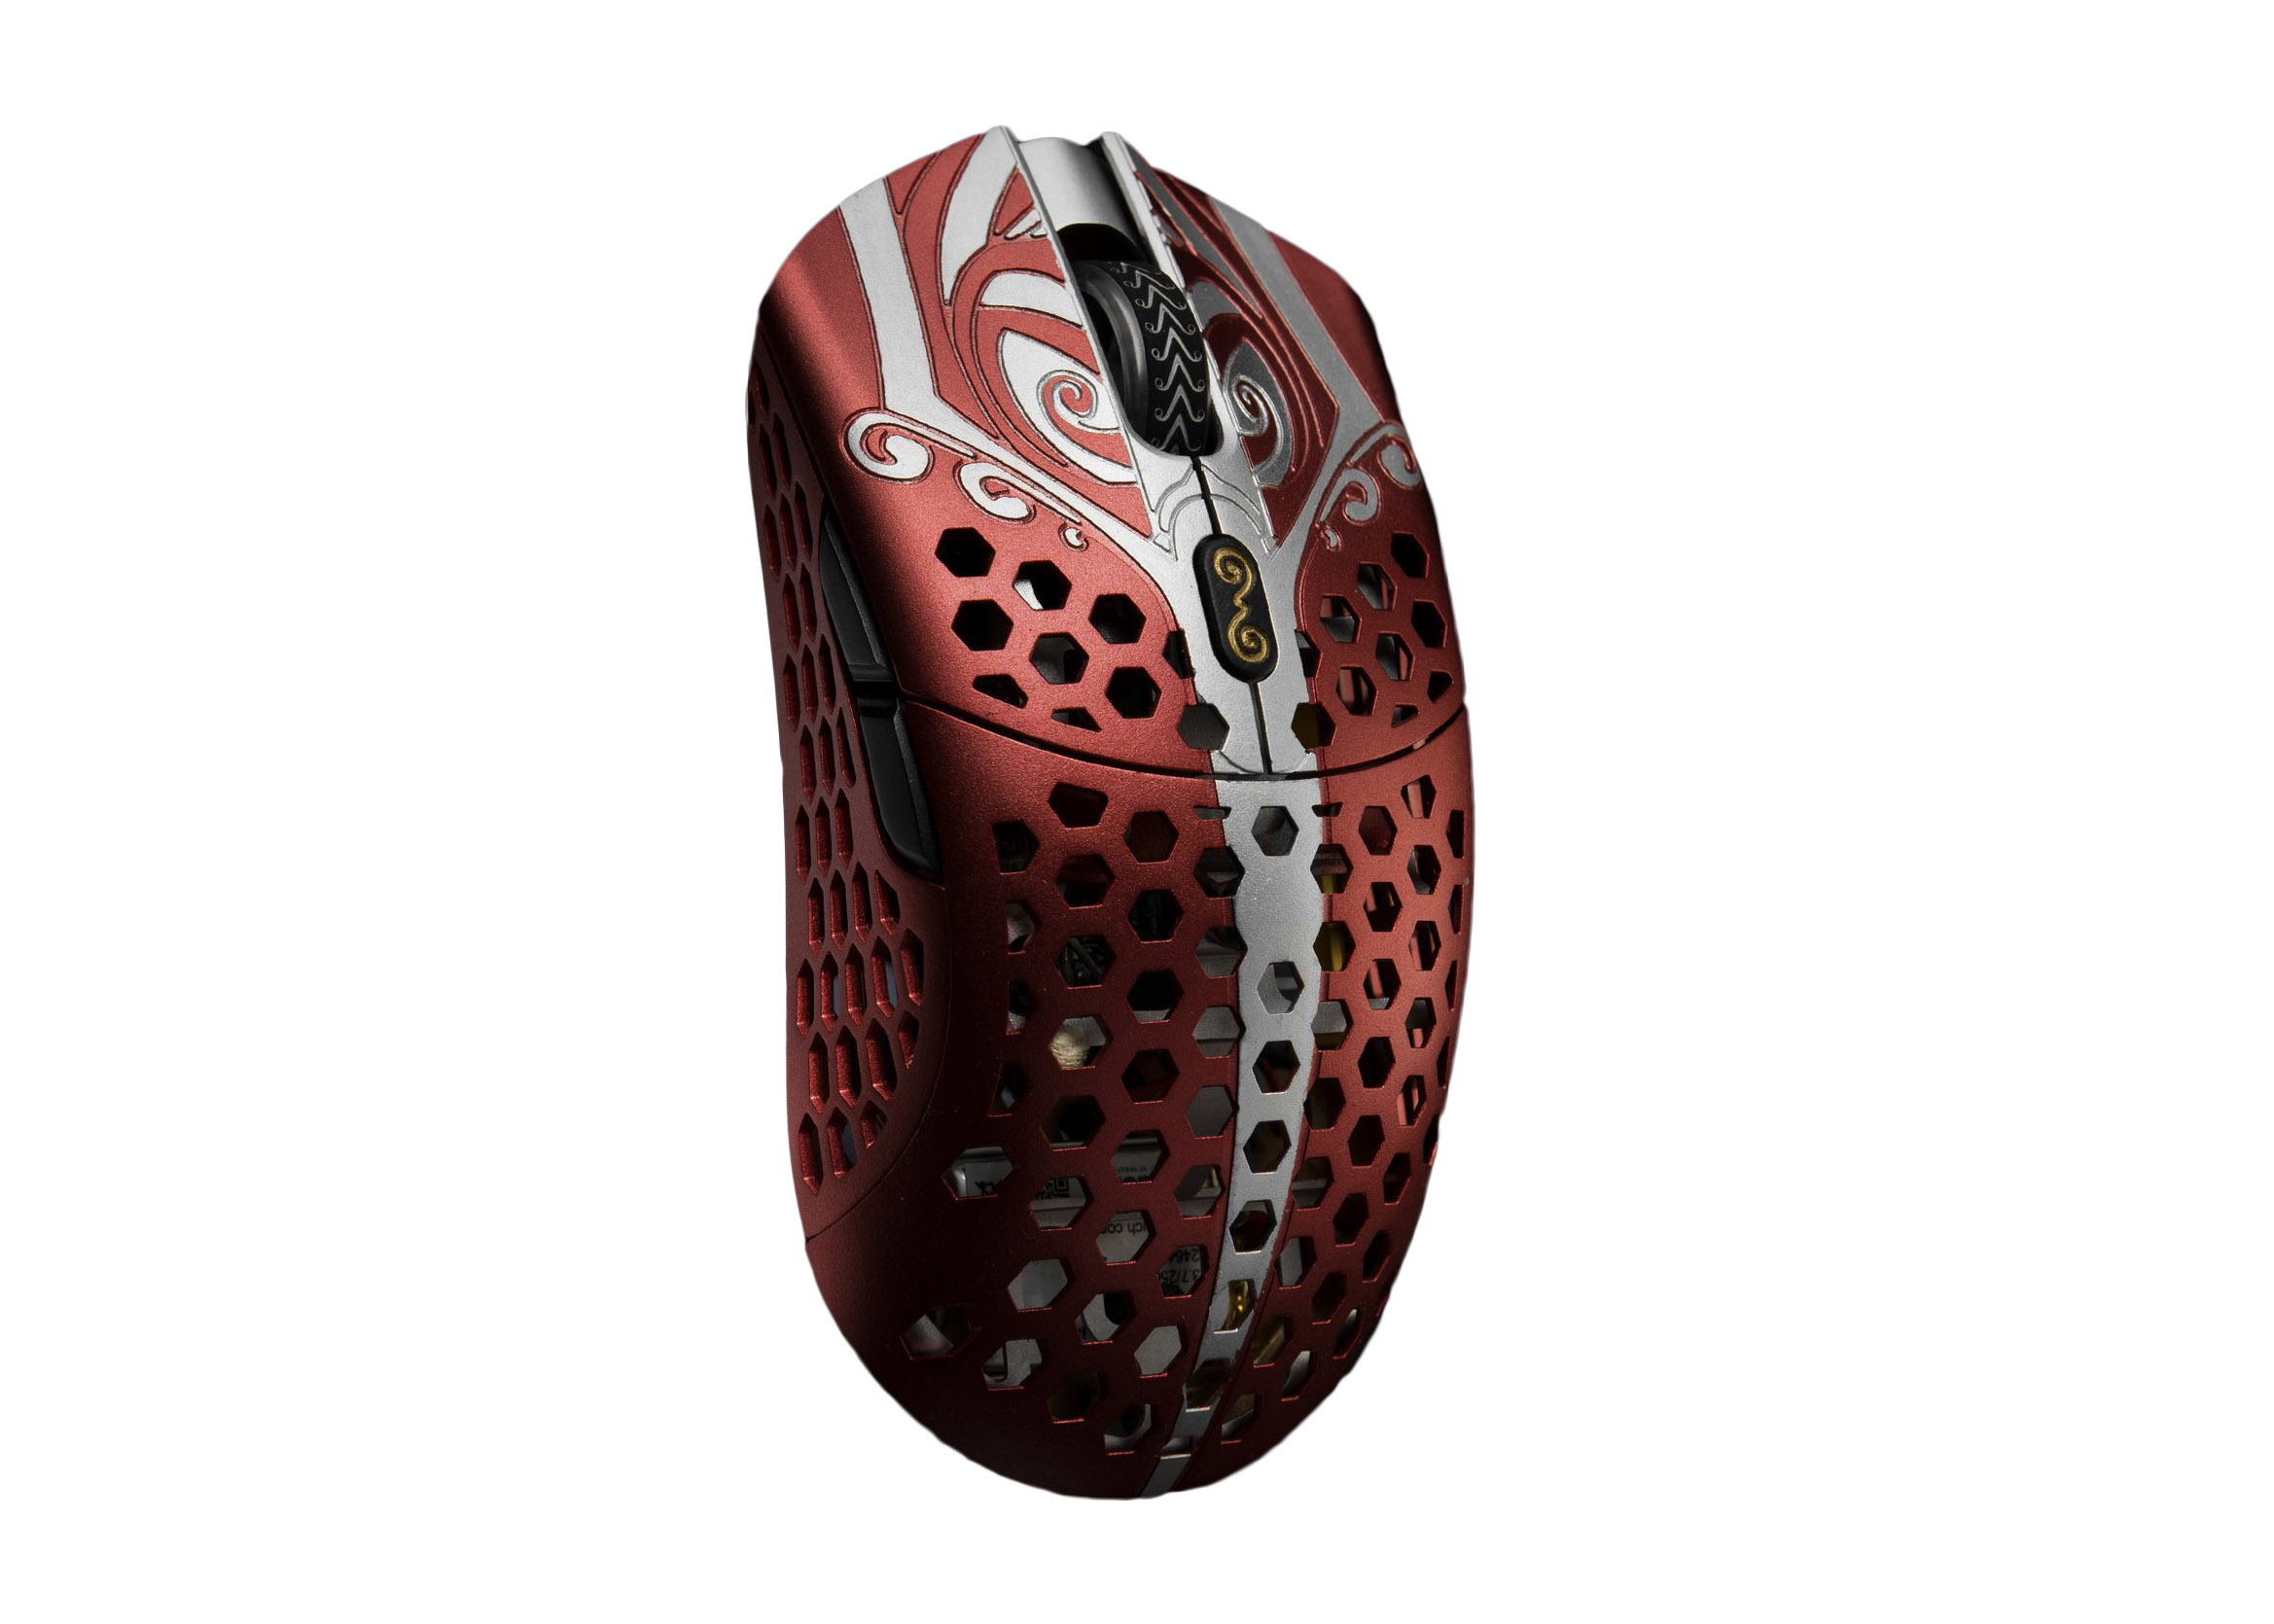 Finalmouse Starlight-12 Wireless Mouse Medium Ares God of War - US